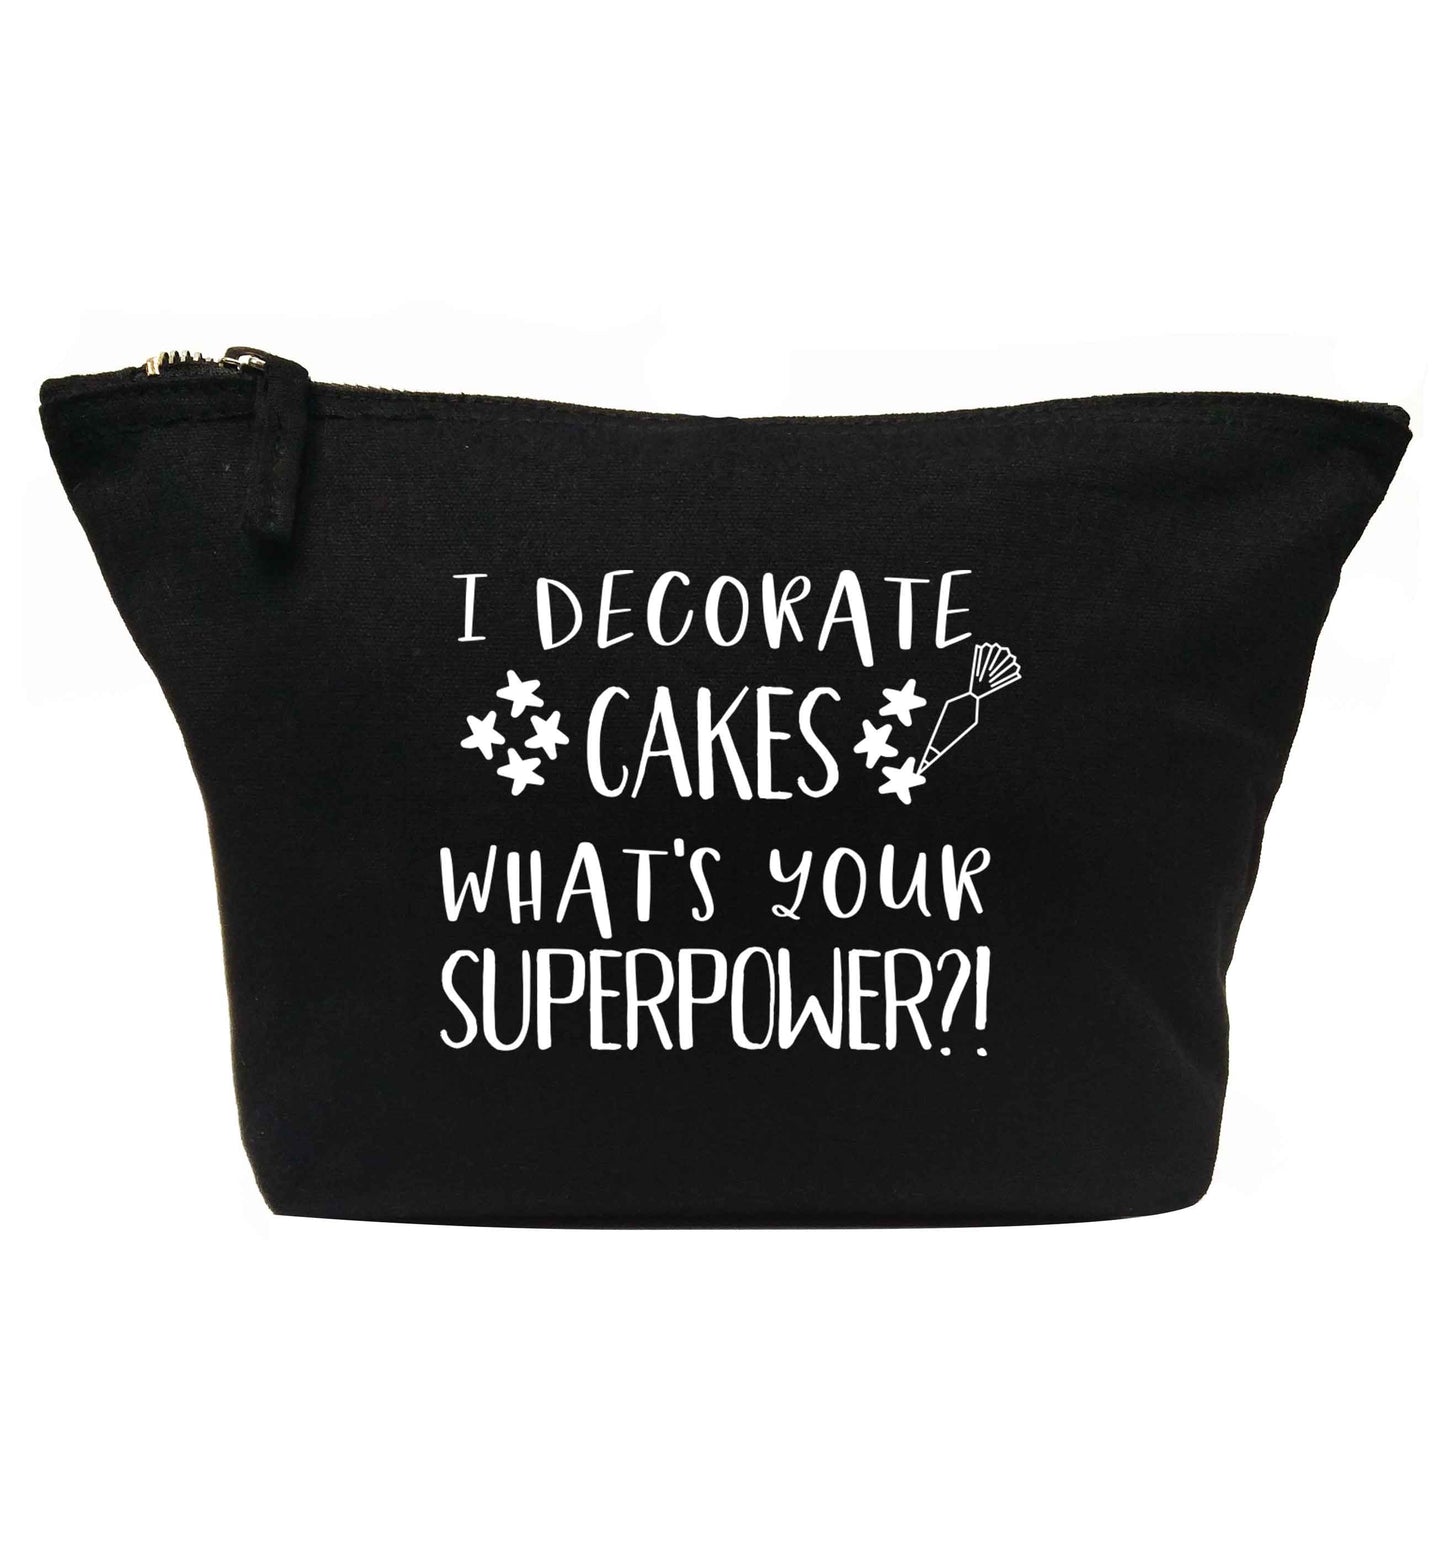 I decorate cakes what's your superpower?! | makeup / wash bag